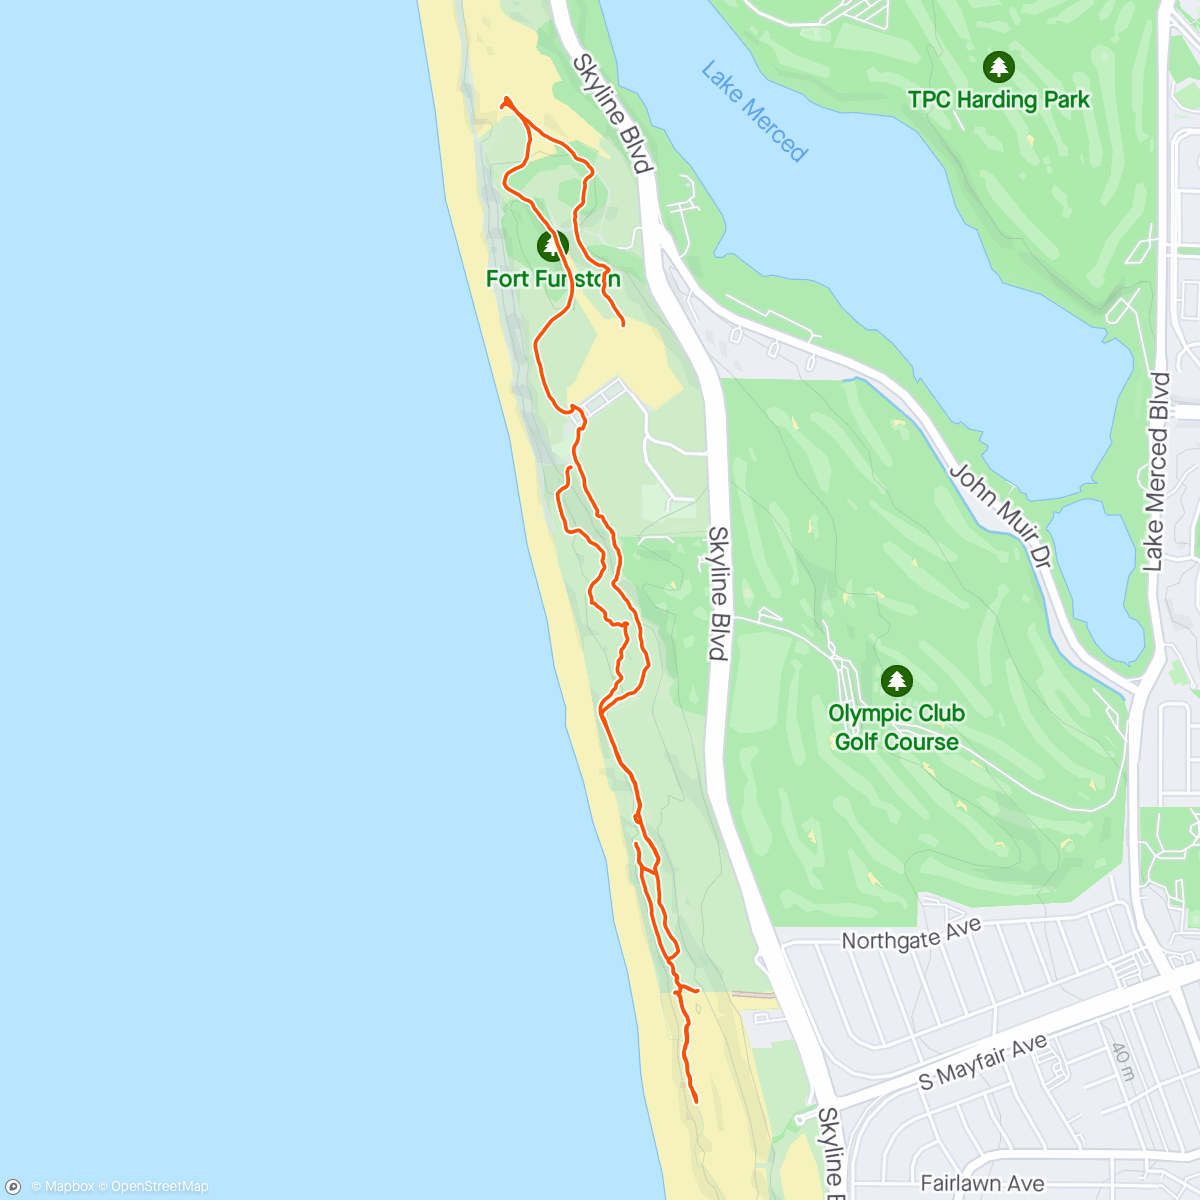 Map of the activity, Extraordinary, most wonder-full Morning and afternoon #Funston Beach walk (I could live there) with a mighty omnipresent Raven presence and one in particular became my friend and came with an important message I still have to figure out - 🌞🌓🐦🐦🐦🌊🚶‍♀️🪄🌁💫⚡️🌊